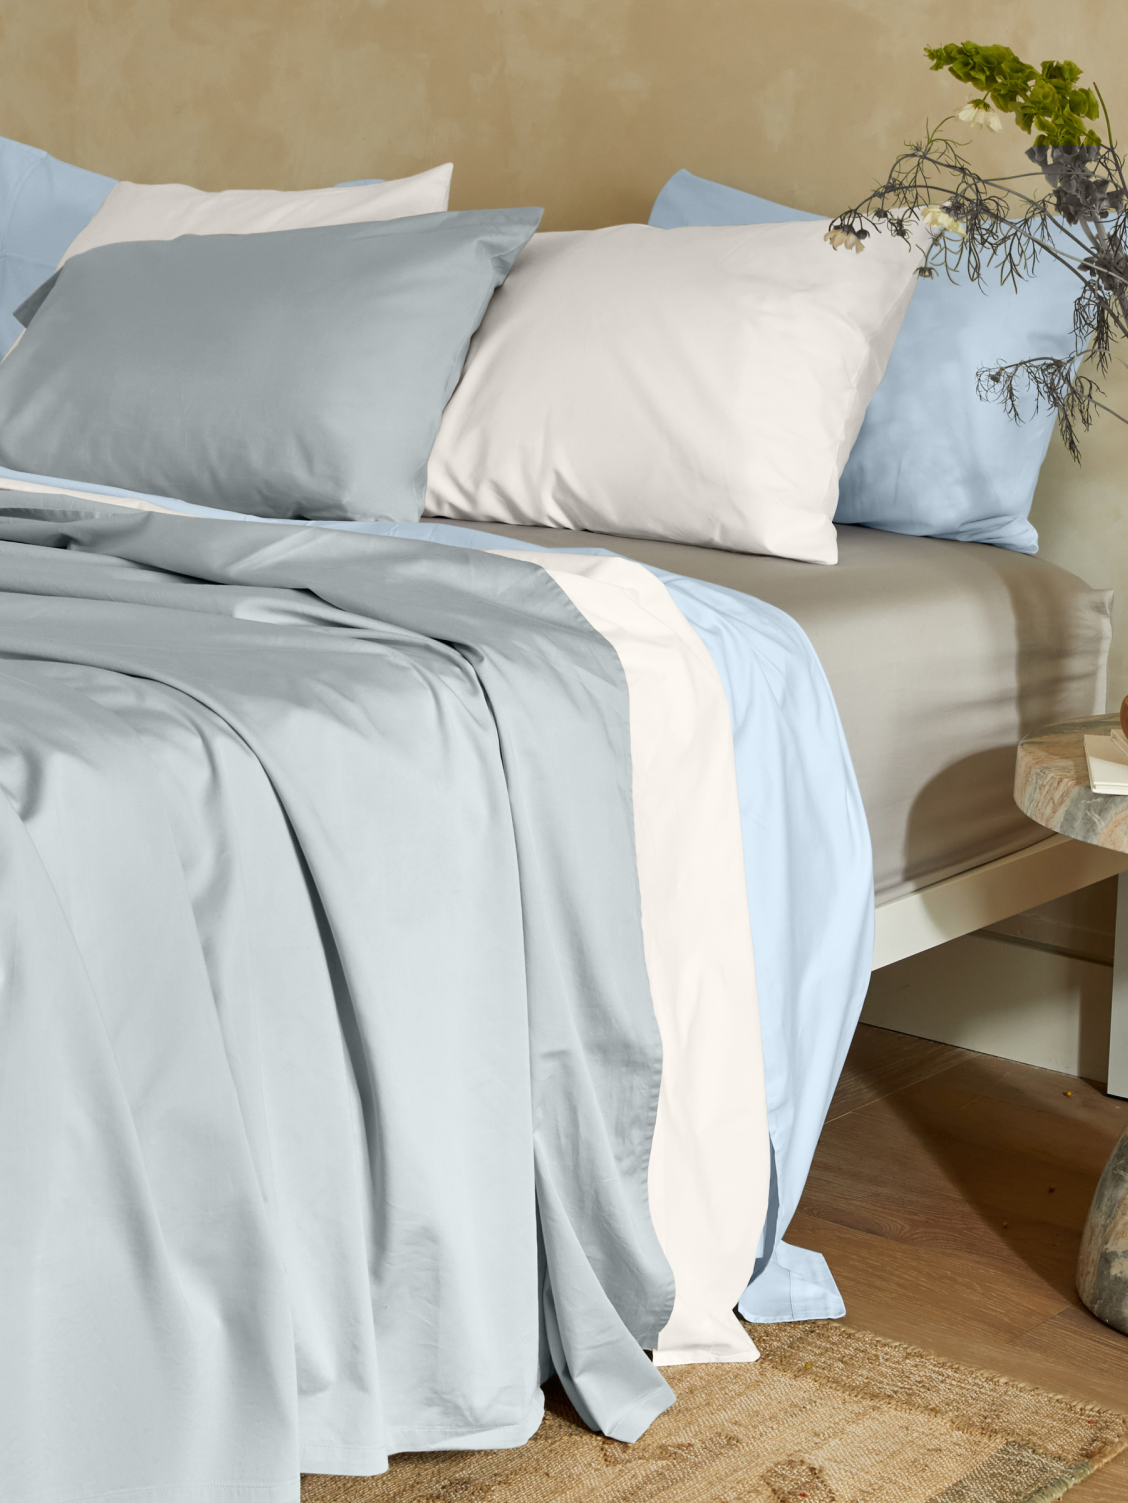 Home | Bedding | Sheets